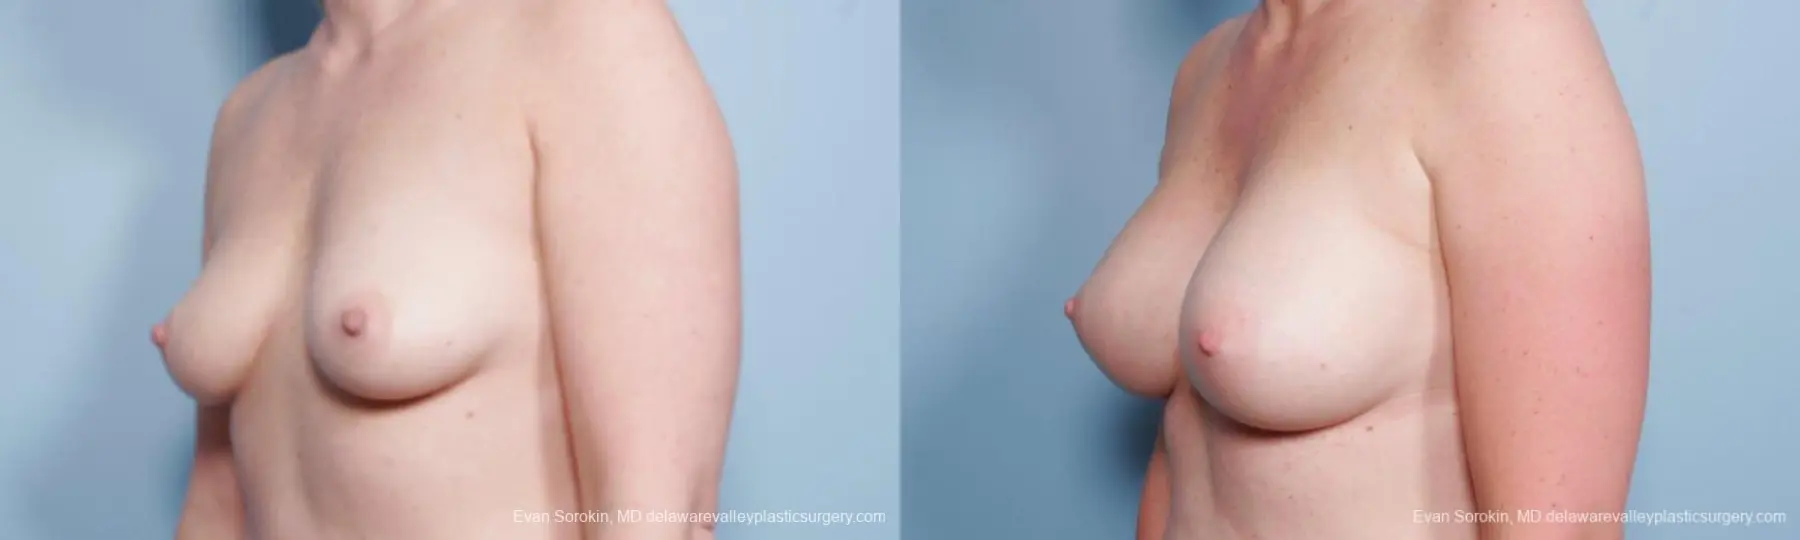 Philadelphia Breast Augmentation 8658 - Before and After 4